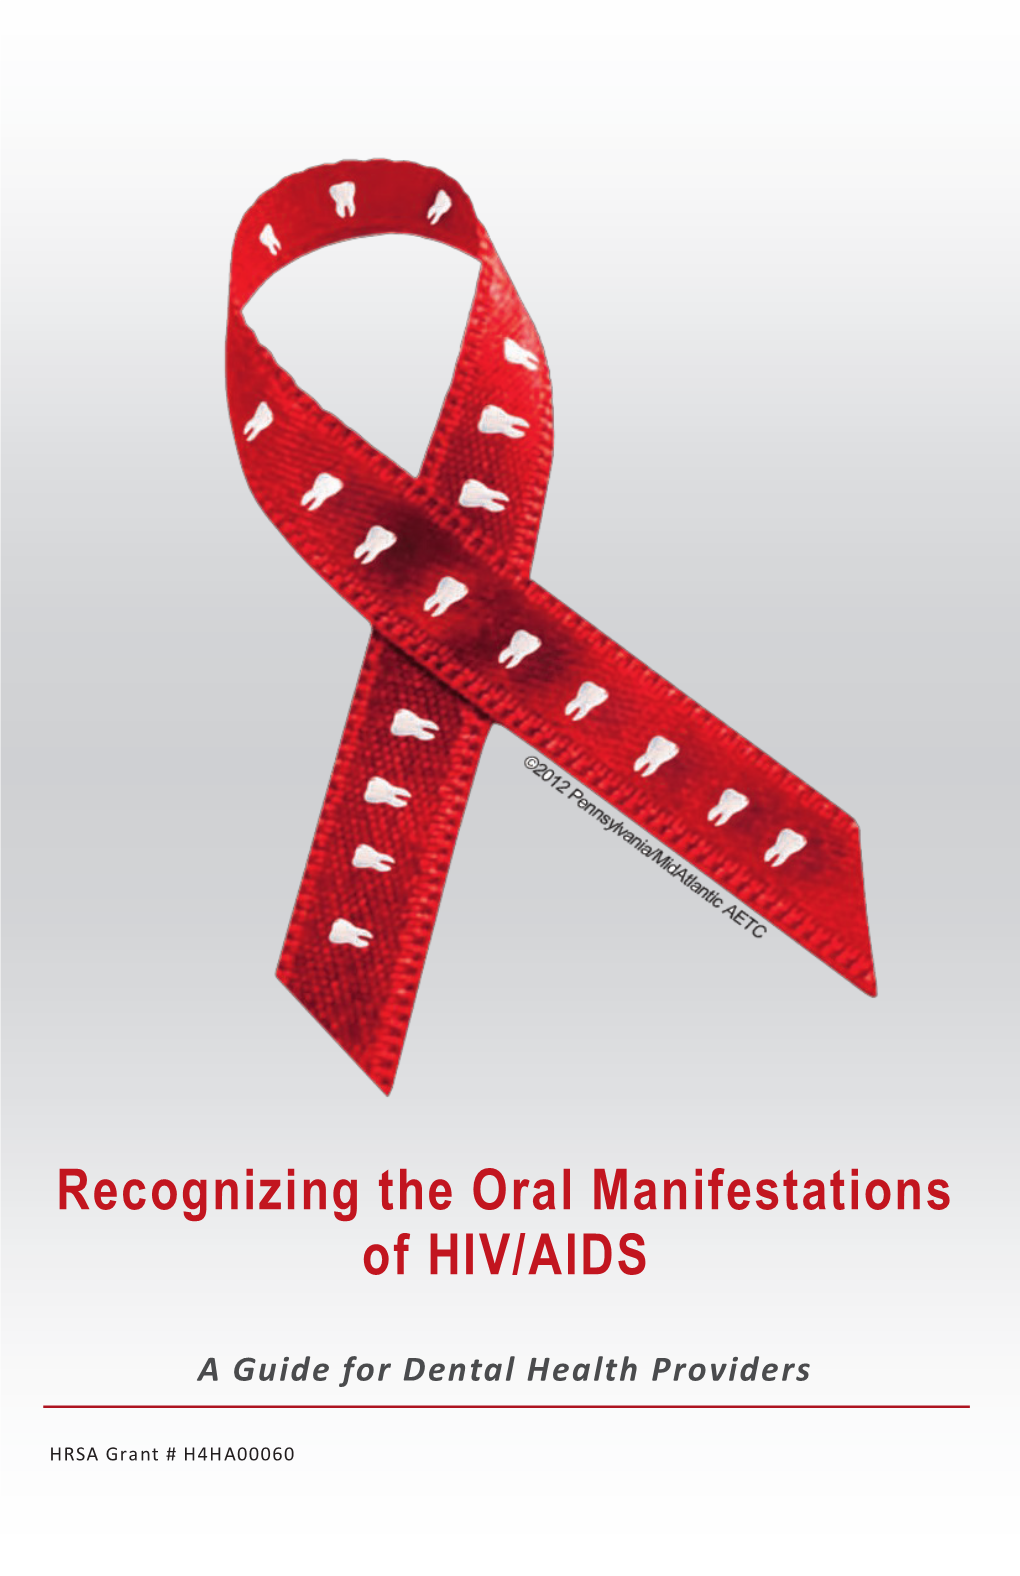 Recognizing the Oral Manifestations of HIV/AIDS